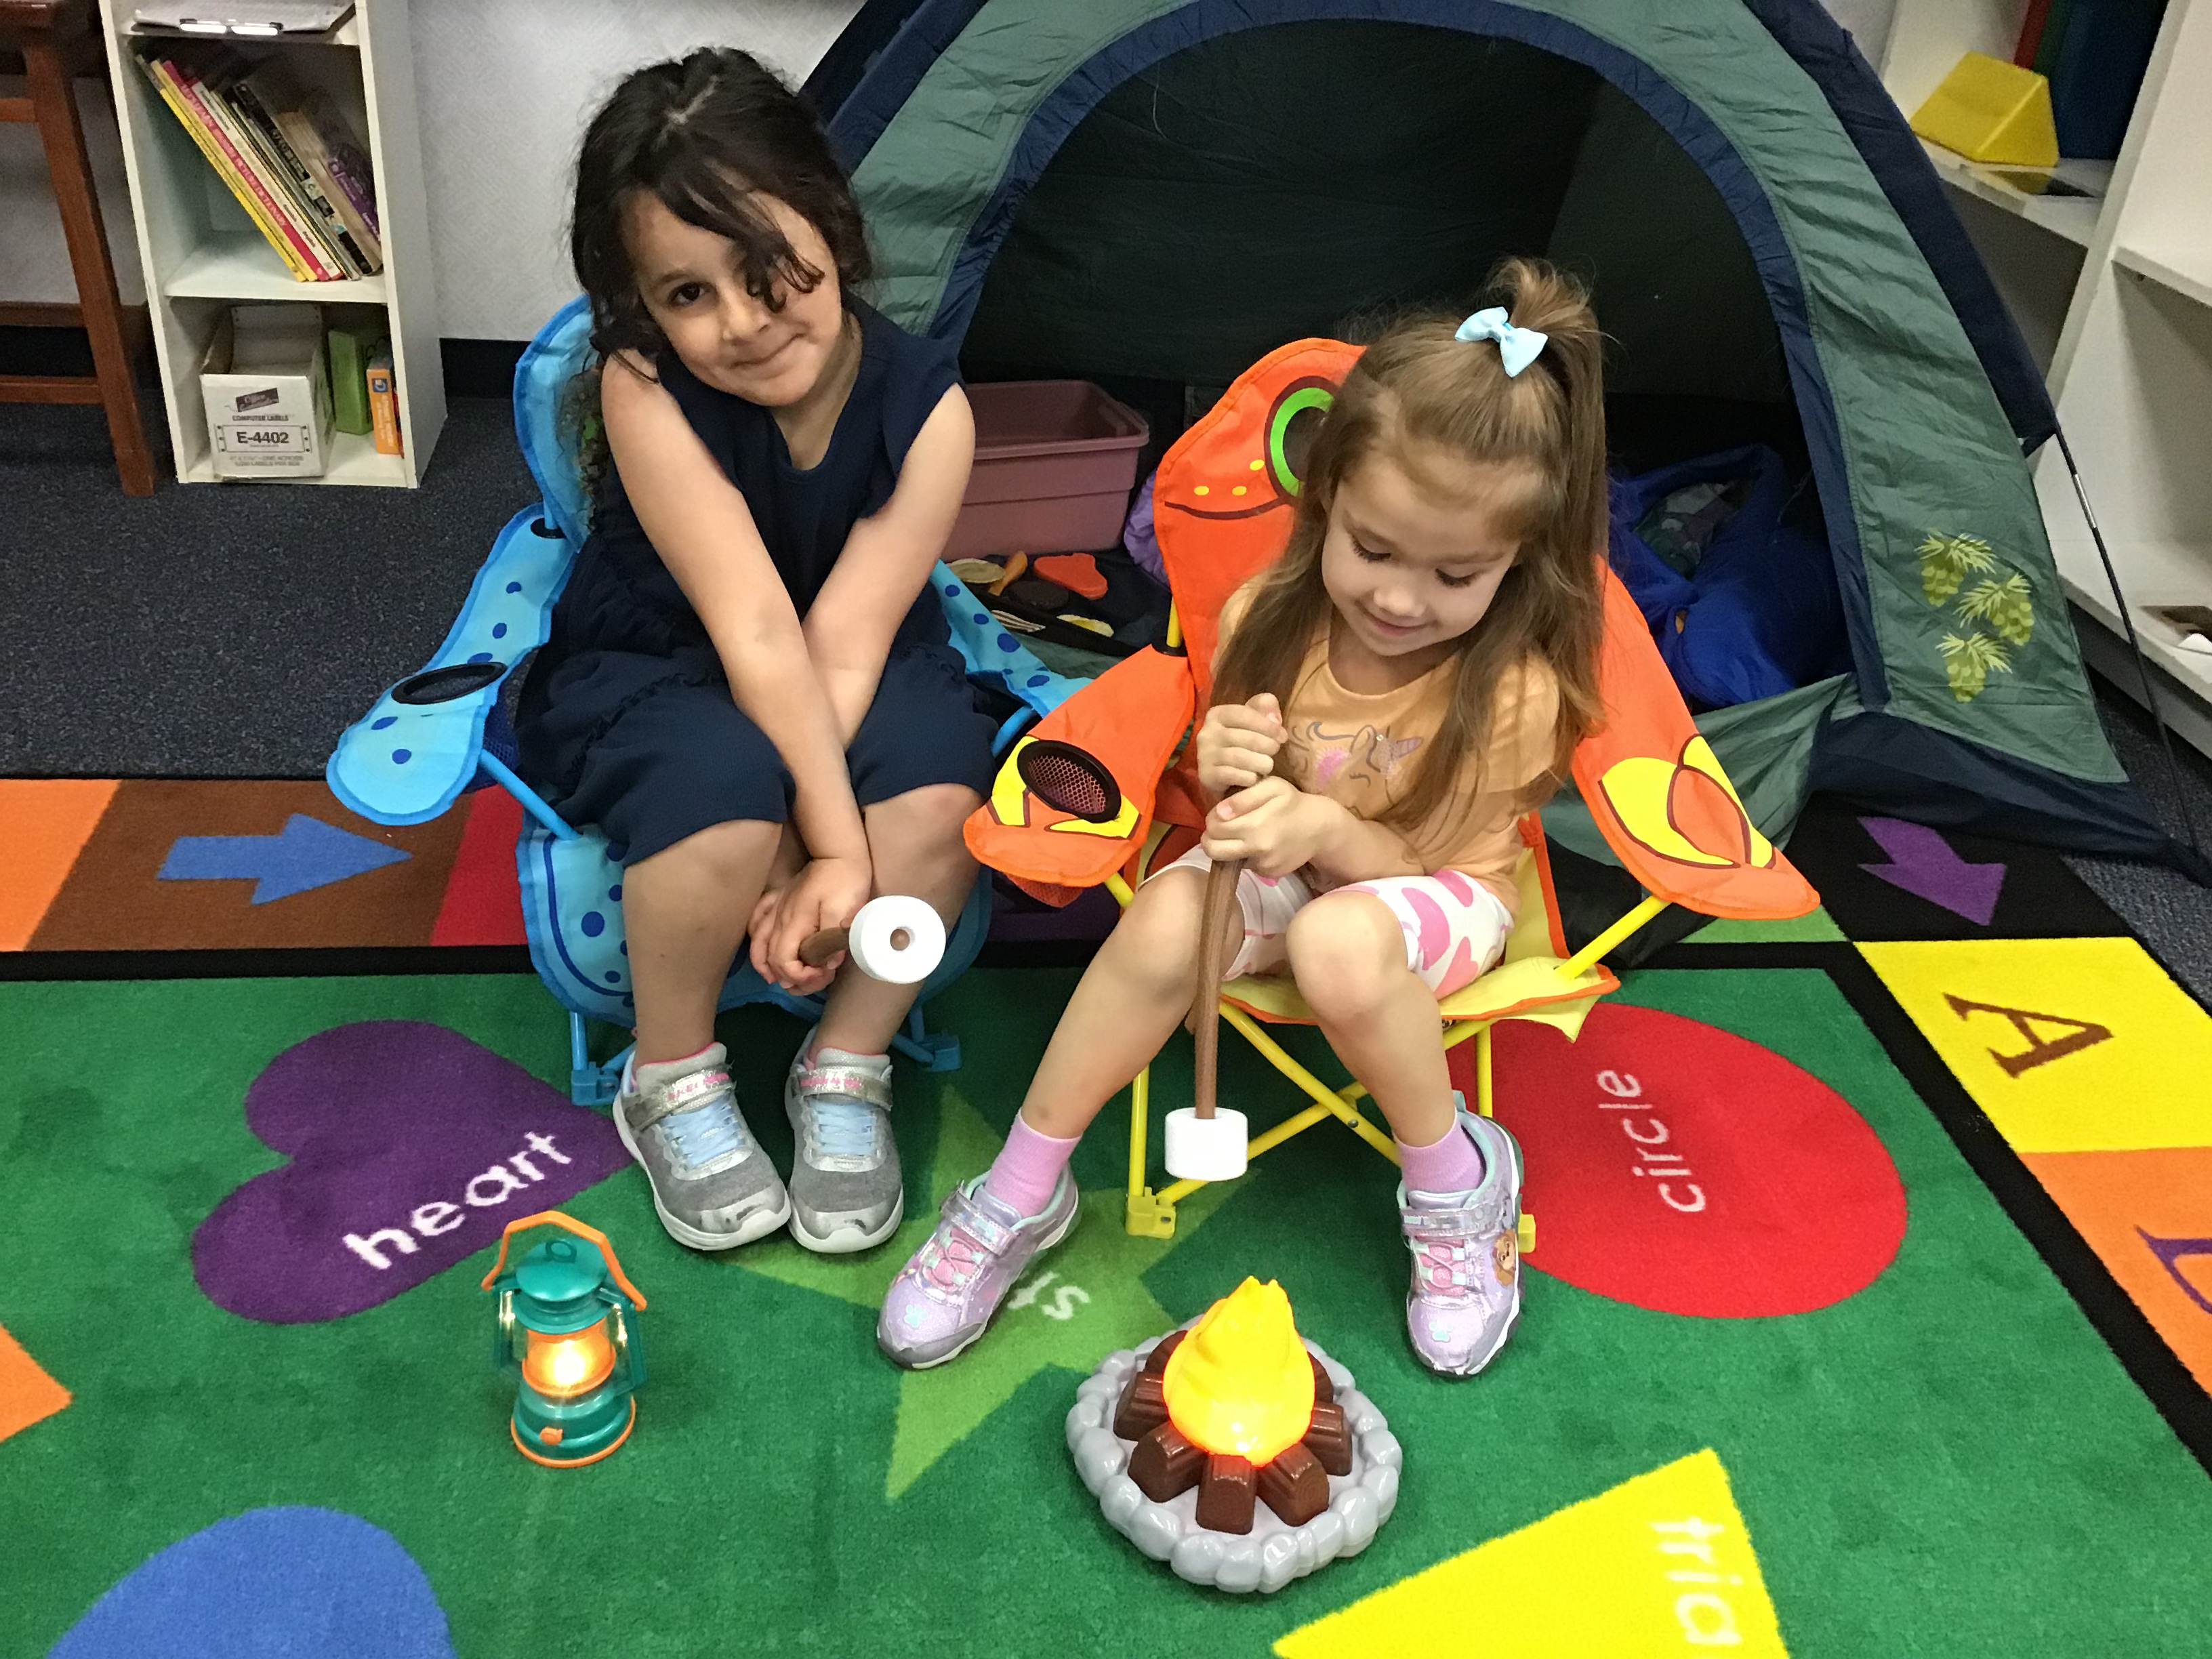 Two students playing in the tent at the block center.